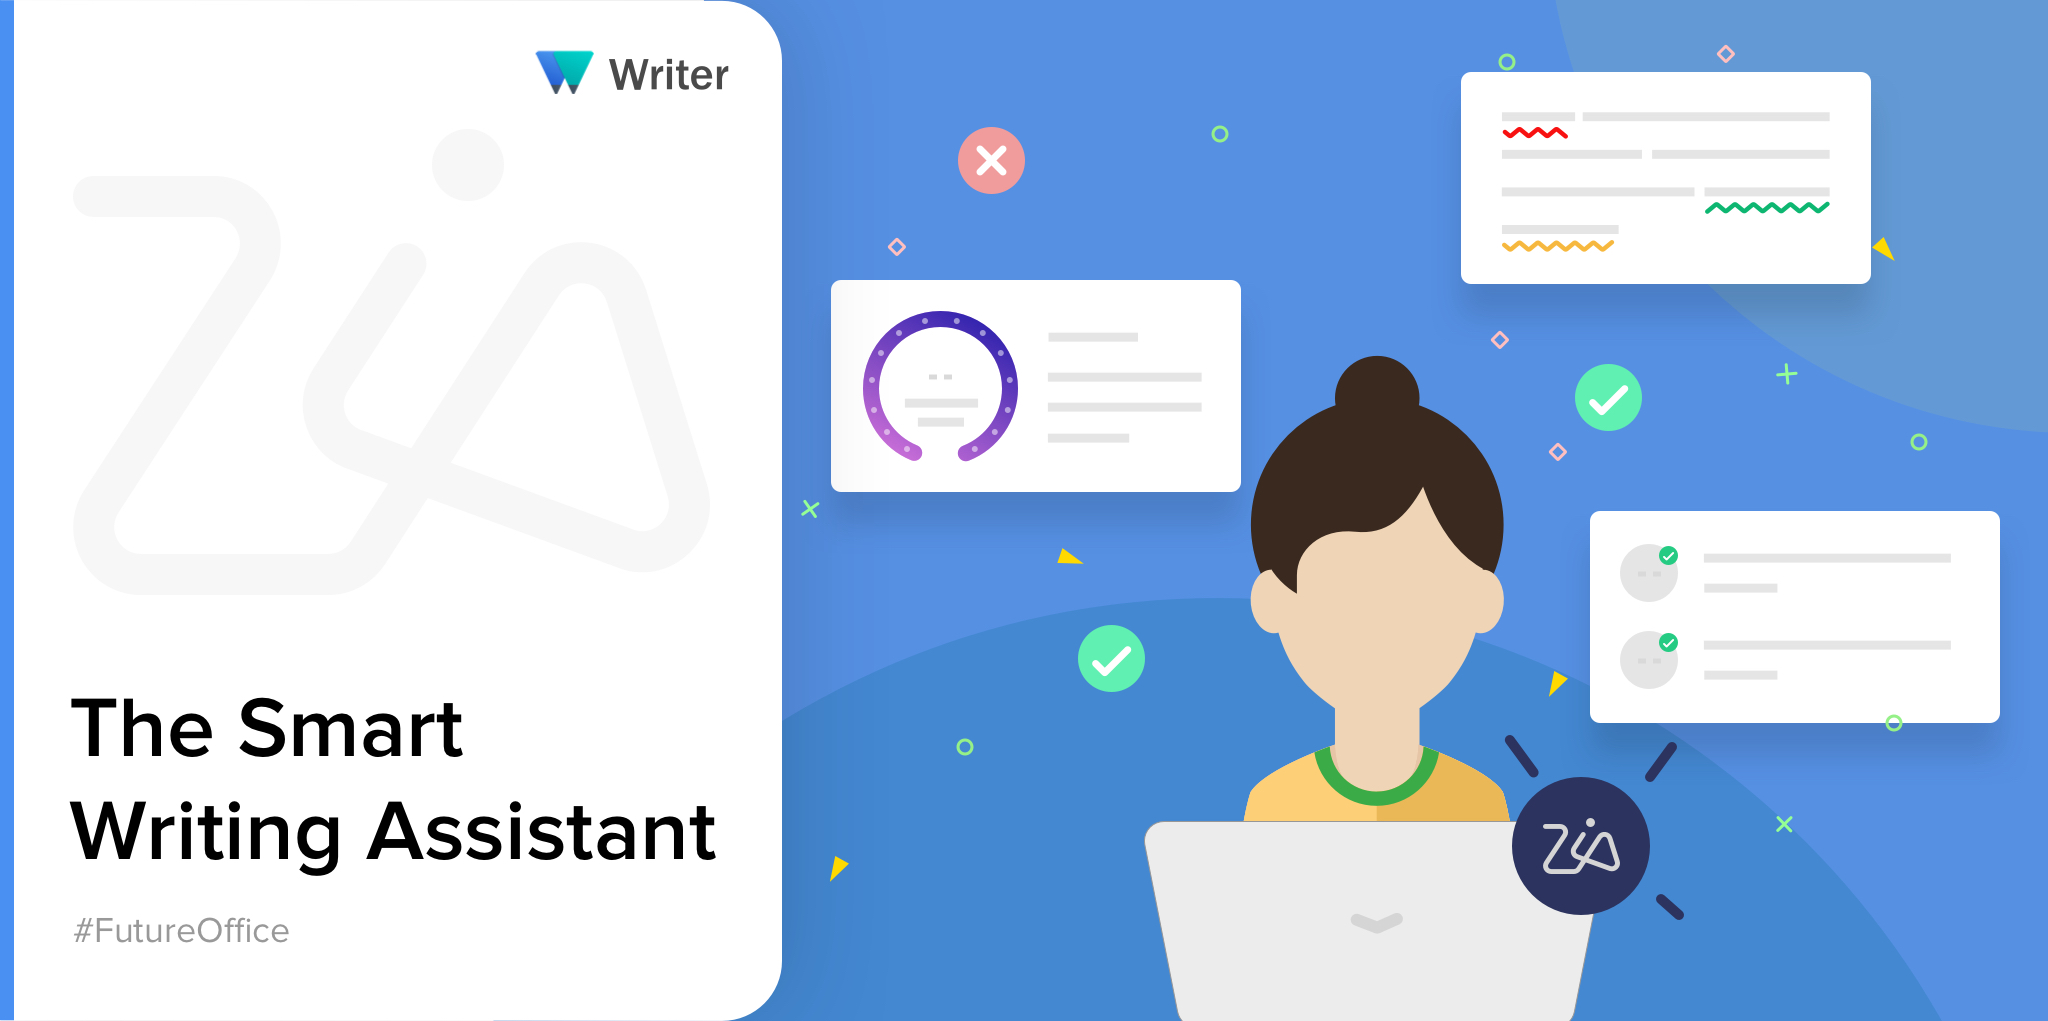 Introducing Zia in Writer: The smart writing assistant trained to help you write better.